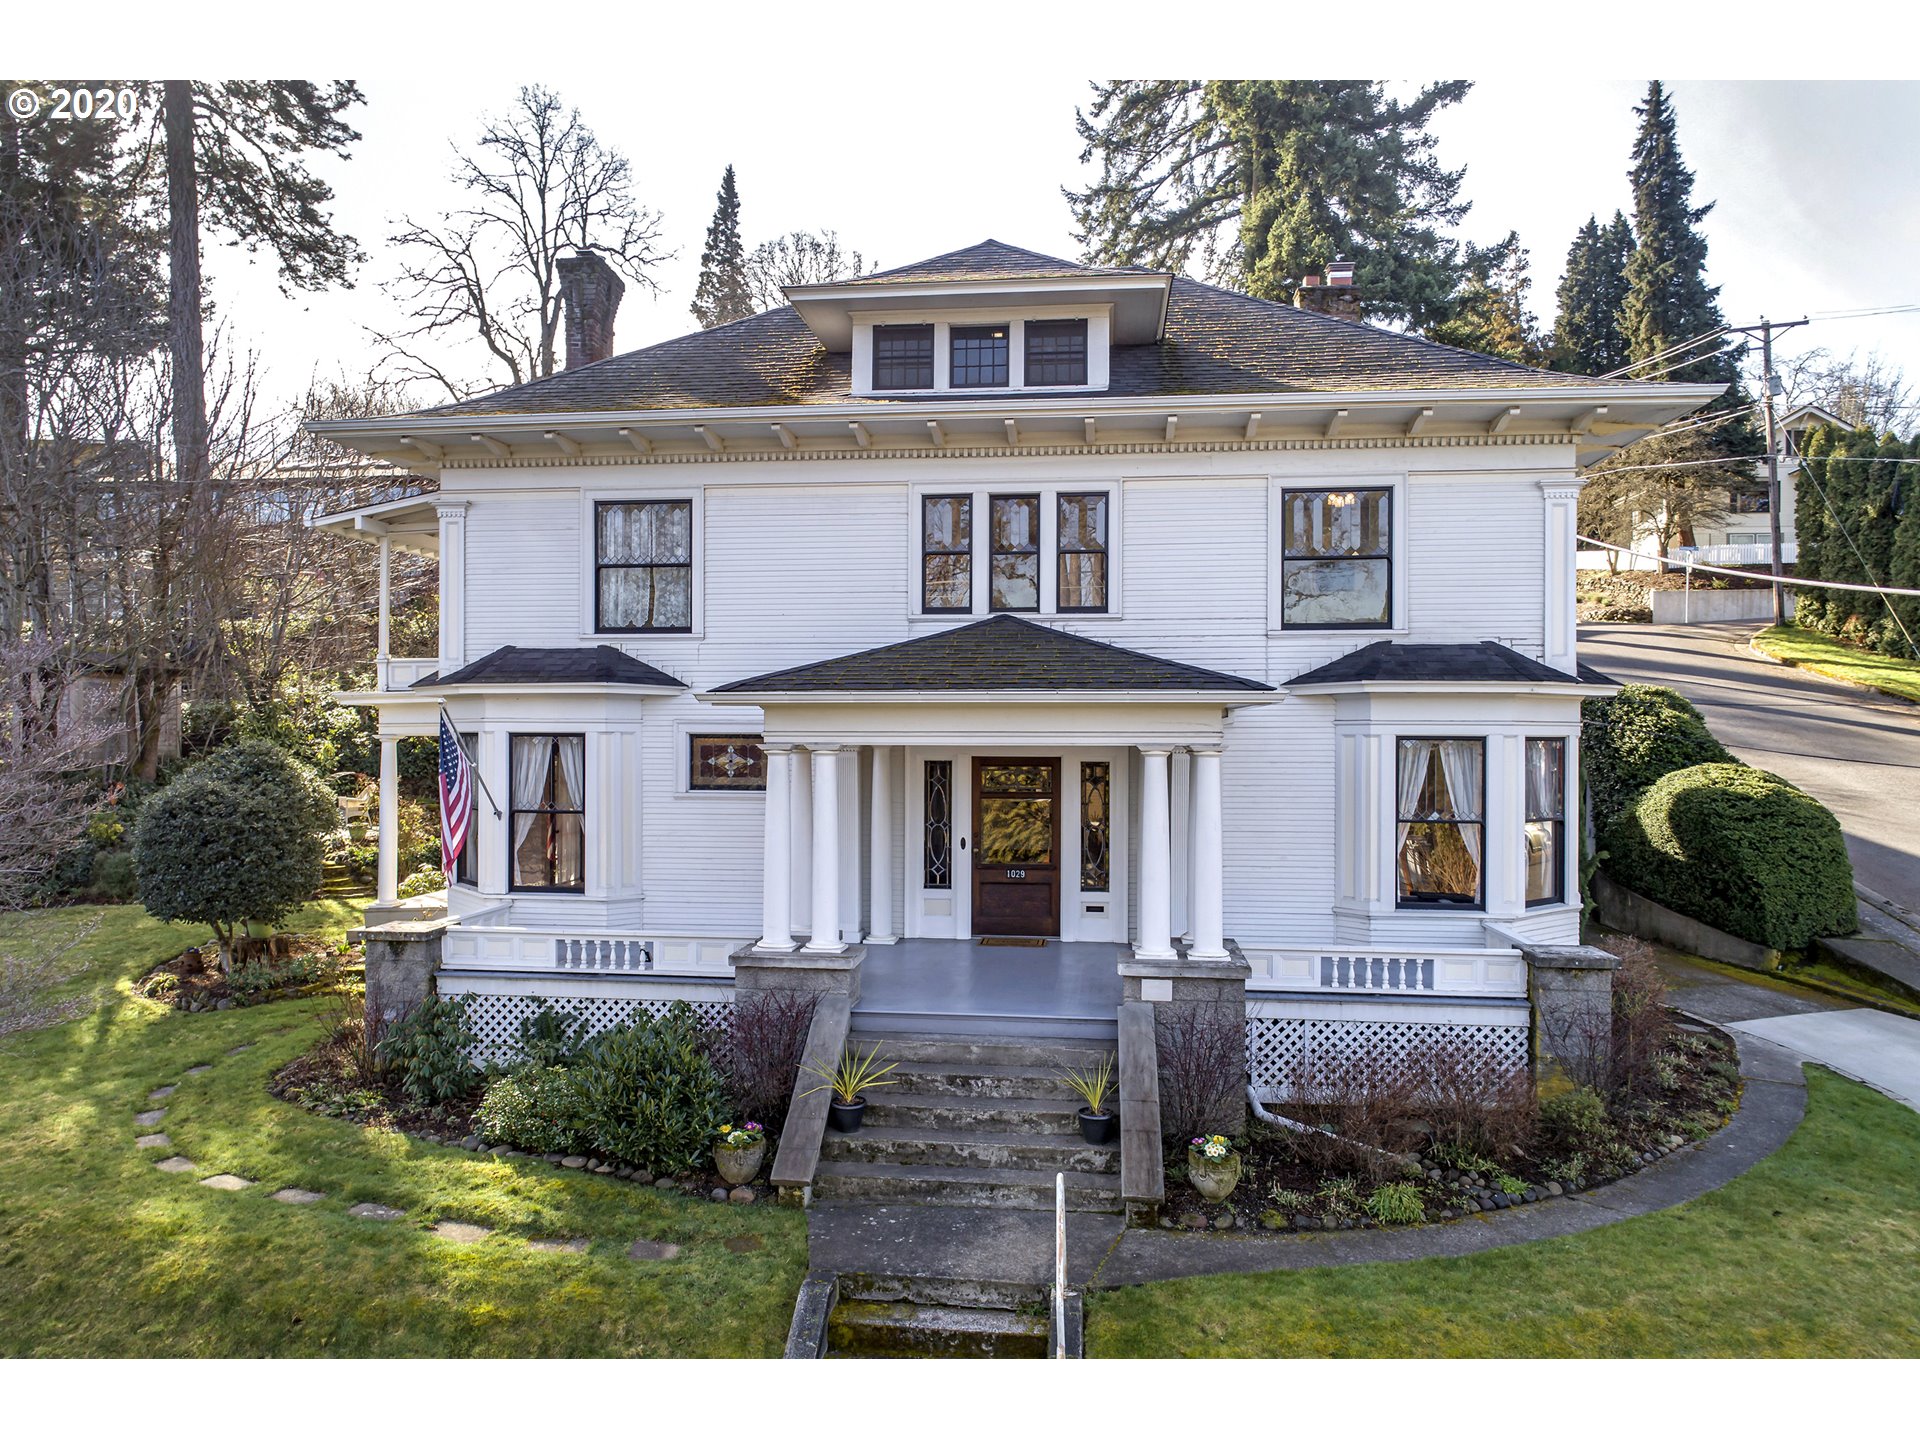 Photo of 1029 STATE ST Hood River OR 97031